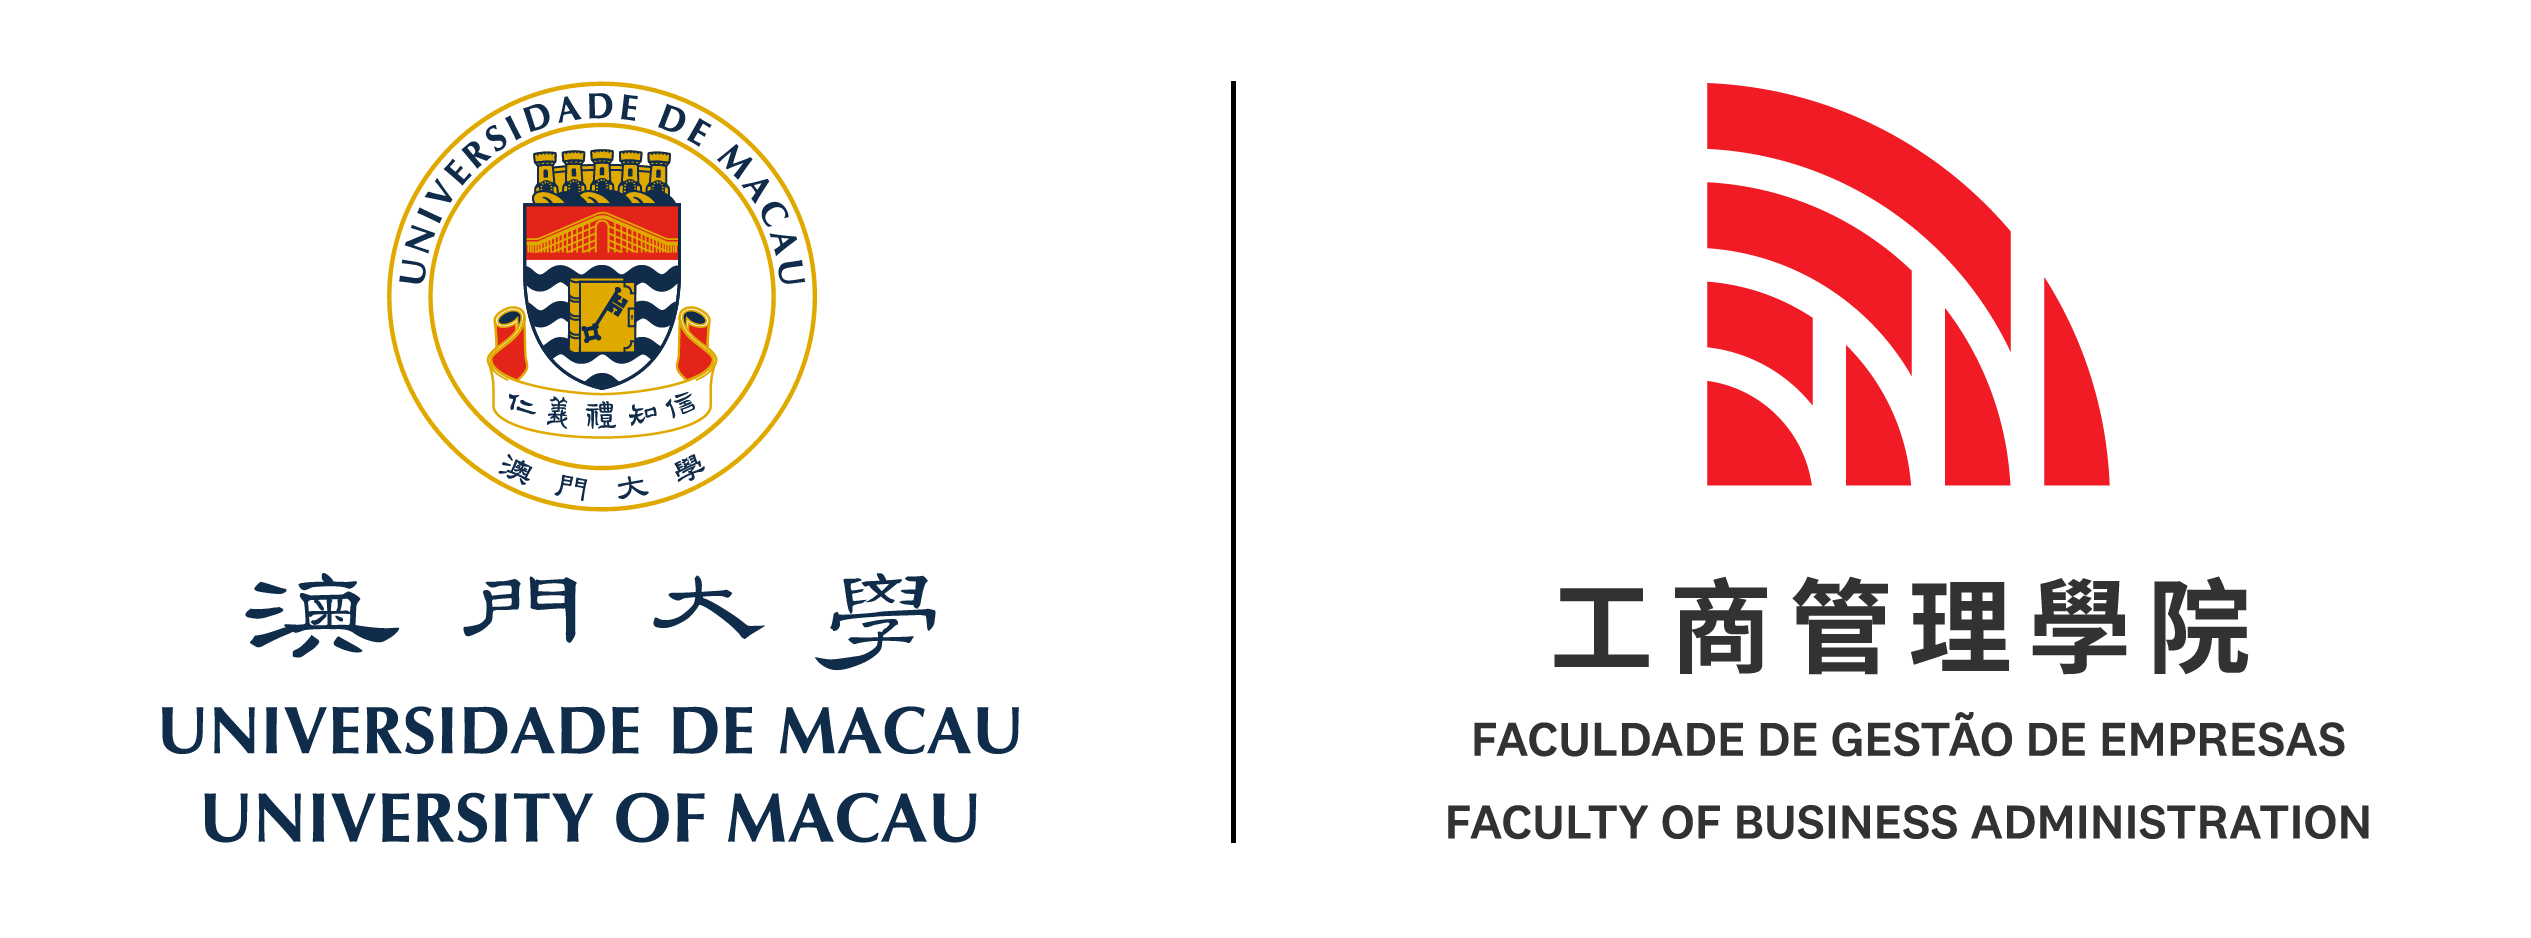 Faculty of Business Administration | University of Macau Logo